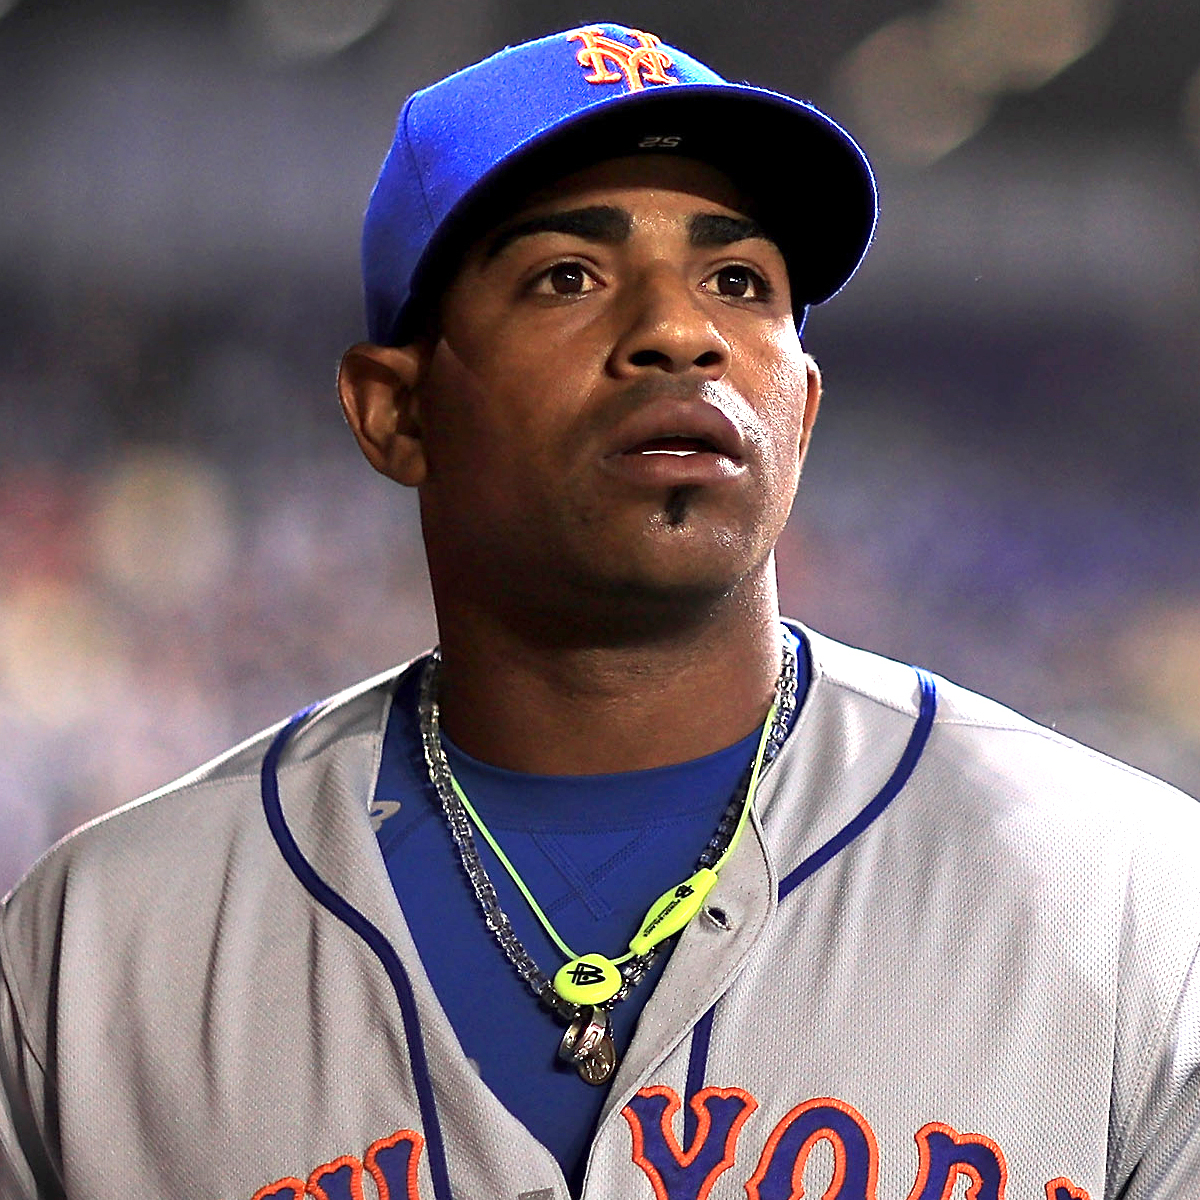 Mets' Yoenis Cespedes latest MLB player to opt out of season due to  coronavirus concerns - ABC News